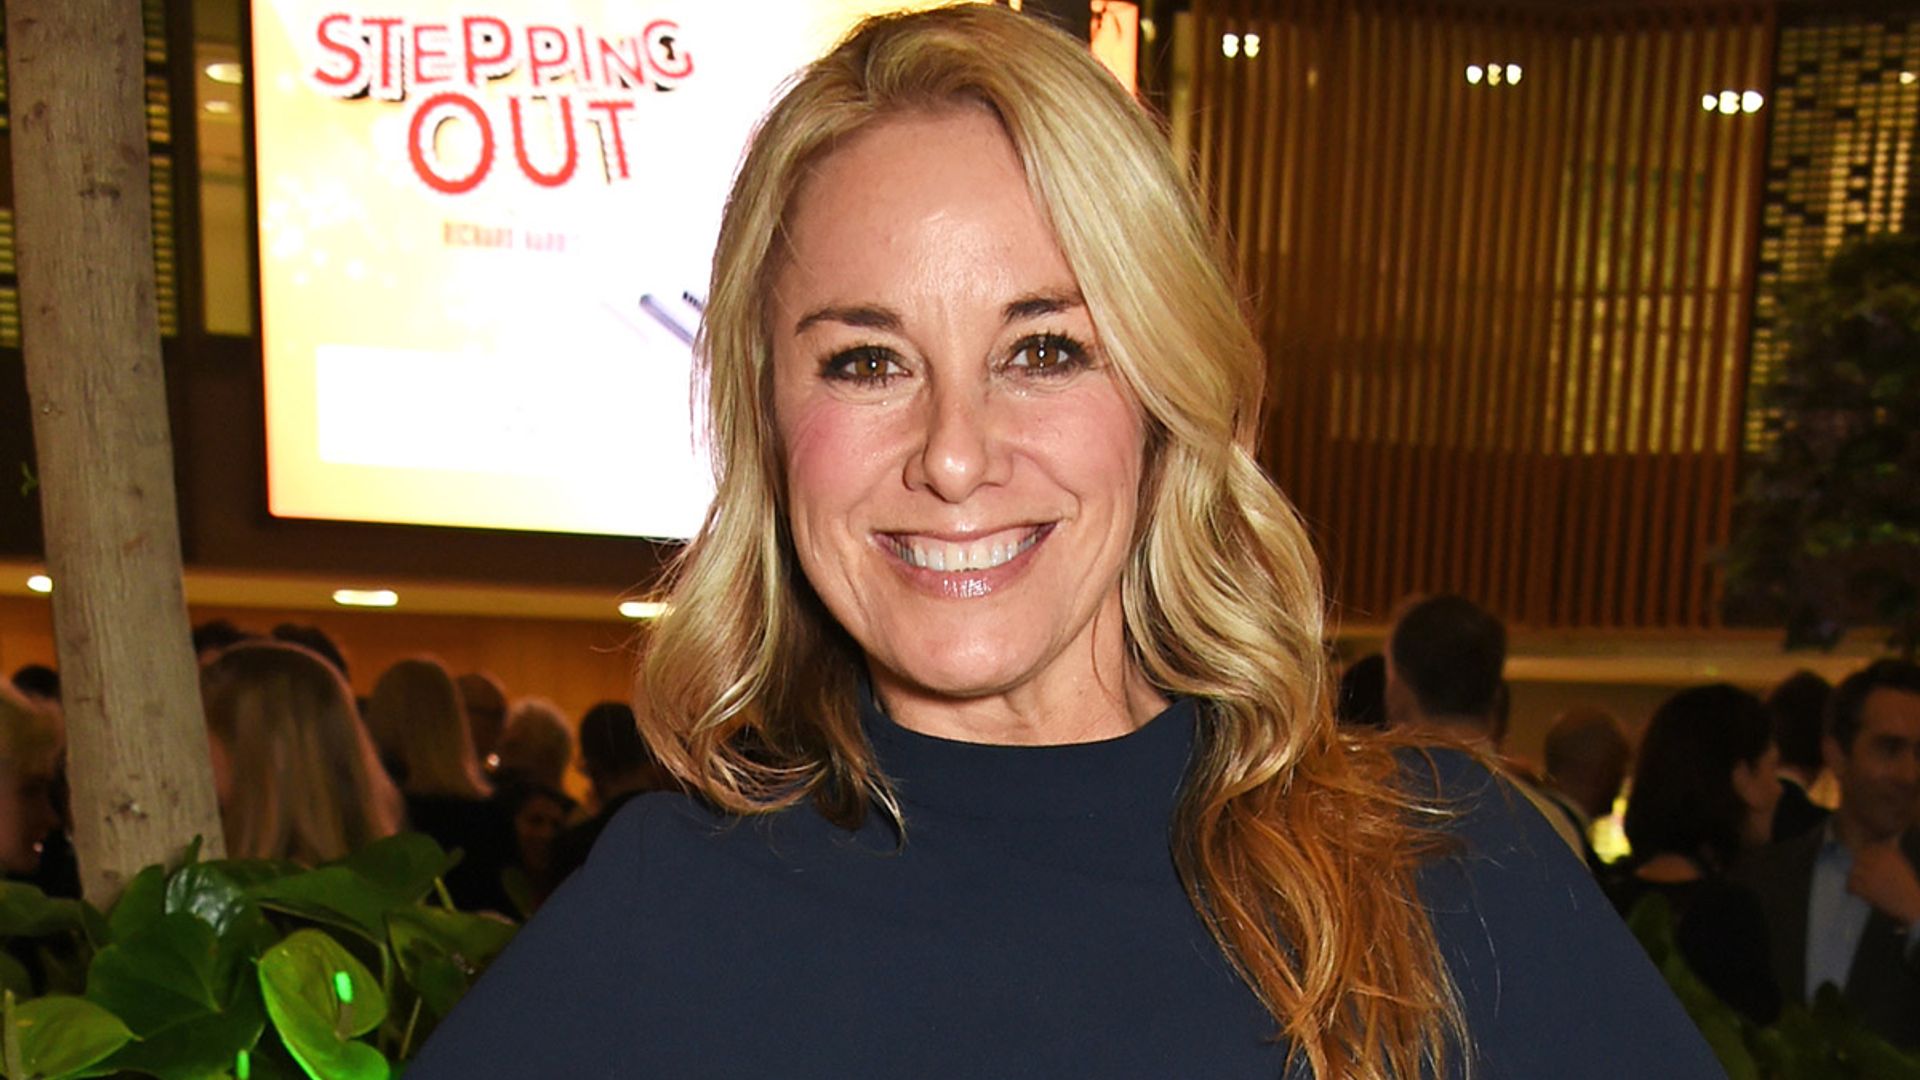 tamzin outhwaite stepping out